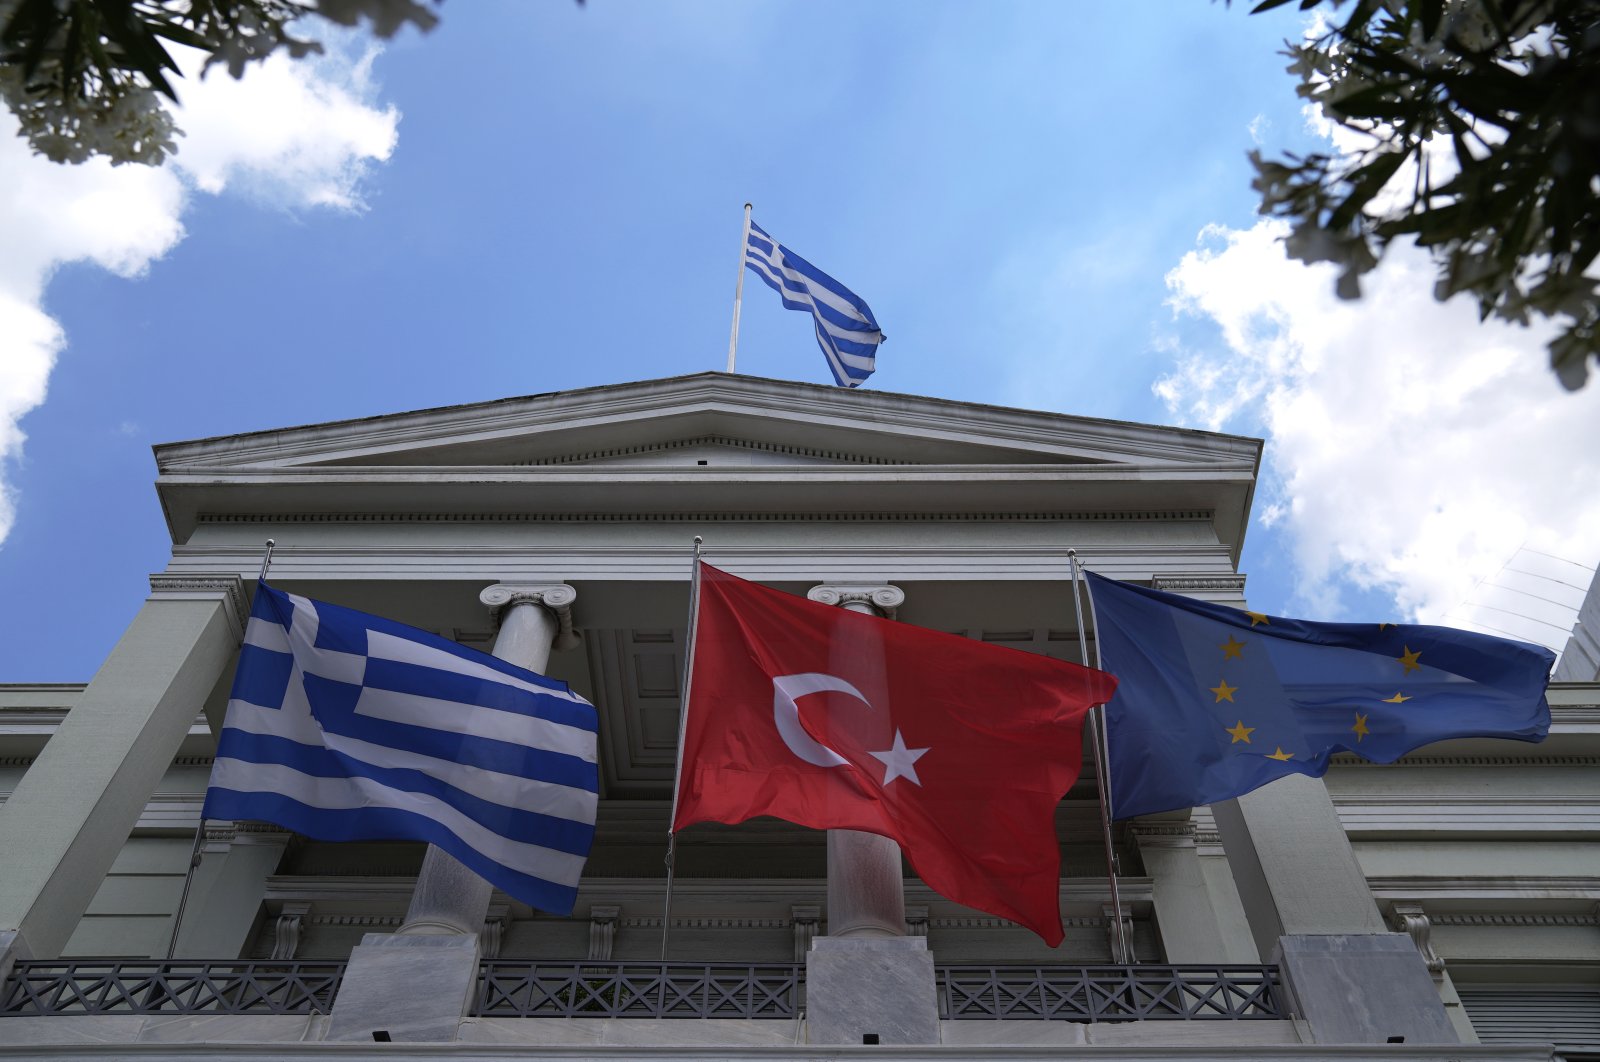 From left to right, the flags of Greece, Turkey and the European Union wave on the foreign ministry house before a meeting of Turkish and Greek foreign ministers in Athens, Greece, May 31, 2021. (AP Photo)